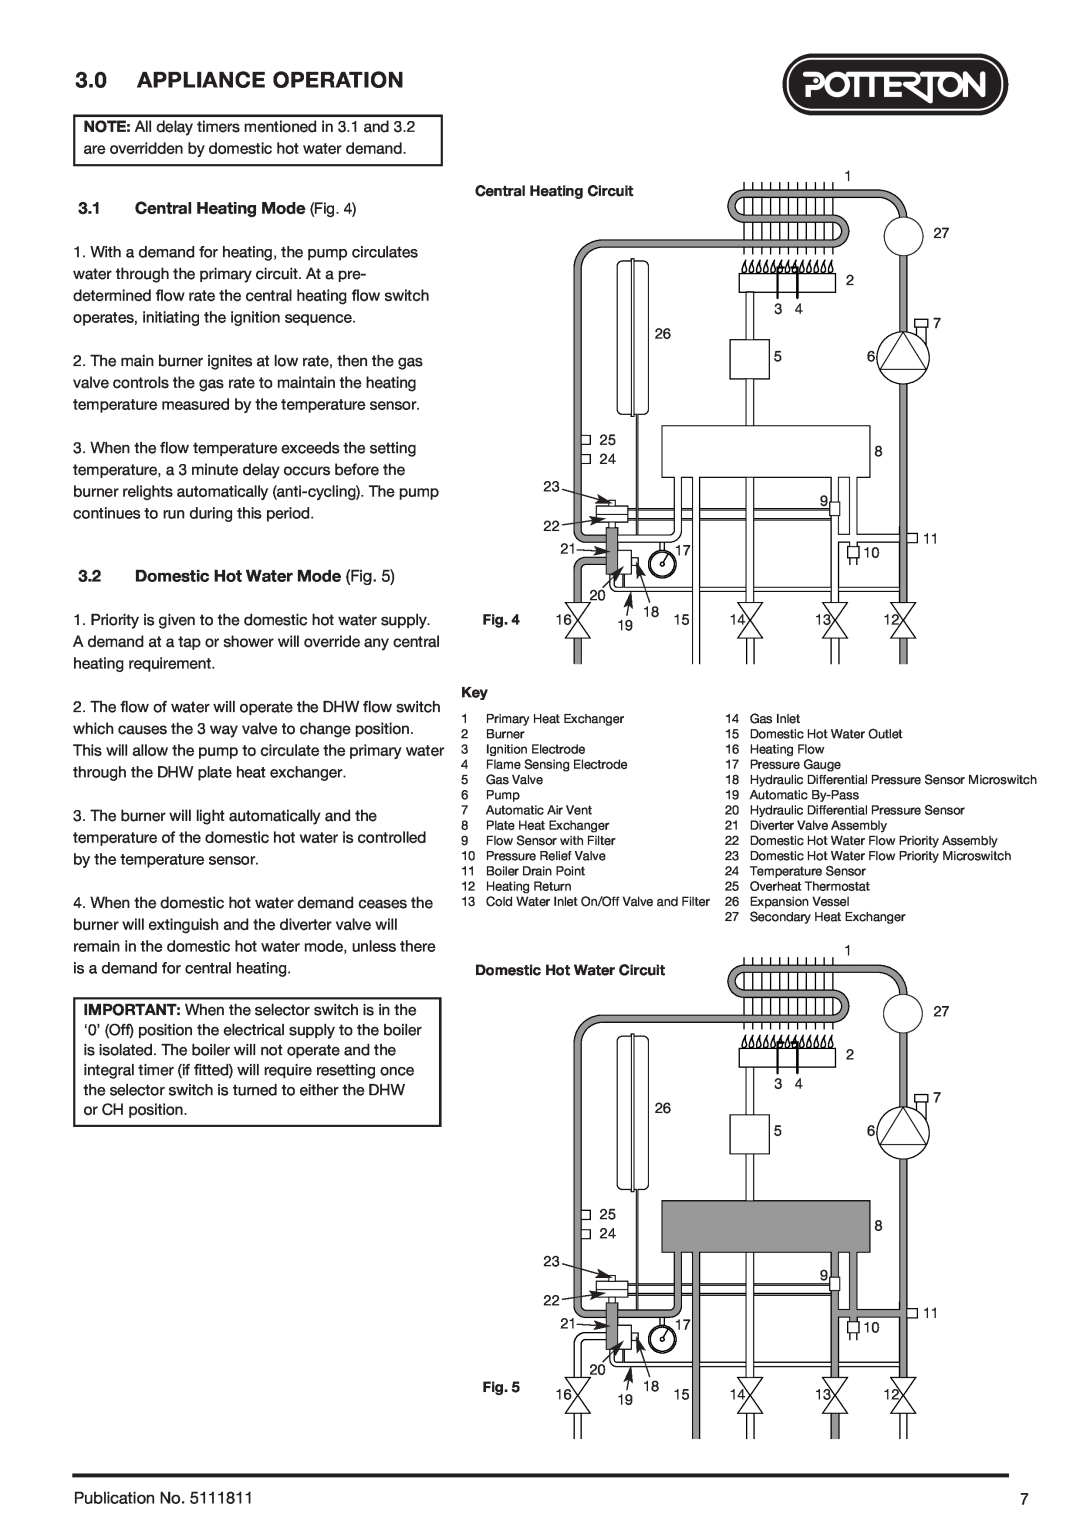 Baxi Potterton 24 Eco HE manual Appliance Operation, Central Heating Mode Fig, Domestic Hot Water Mode Fig, Publication No 